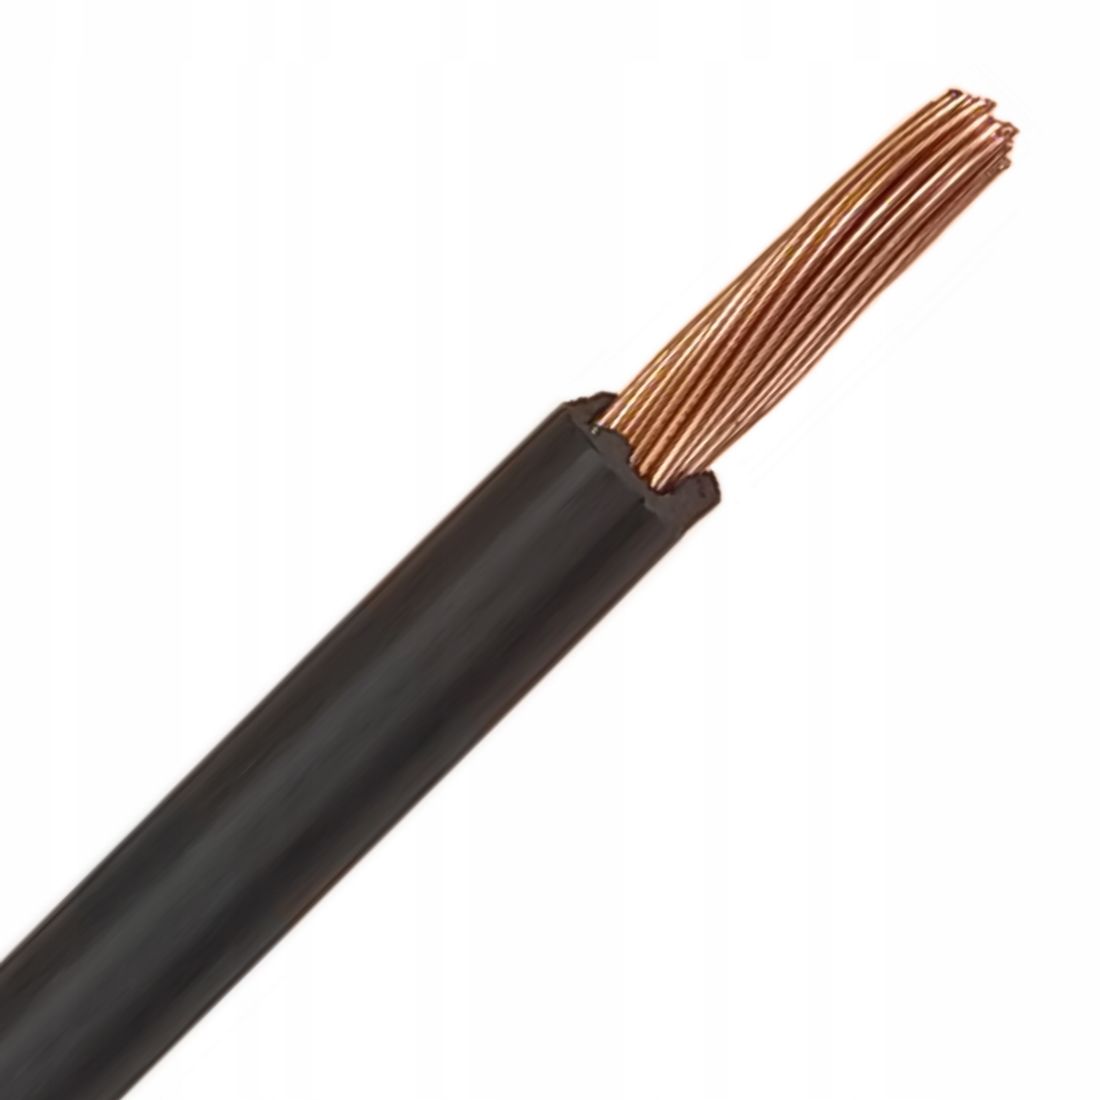 COUPE CABLE BATTERIE LG 165MM COUPE 15MM 50KG/MM² - Gallin